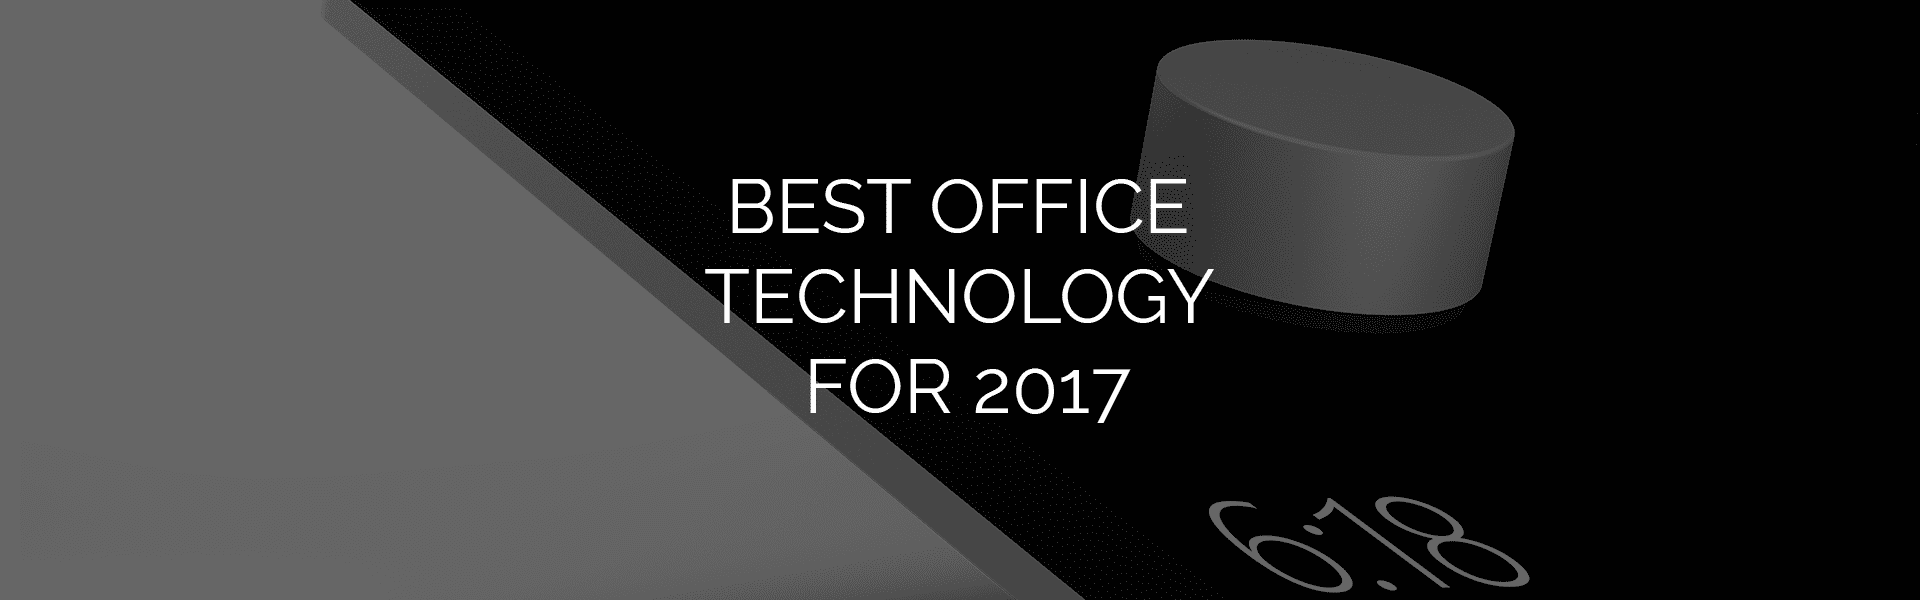 Best Office Technology for 2017 | Praxis Technologies Digital Marketing and Branding Agency